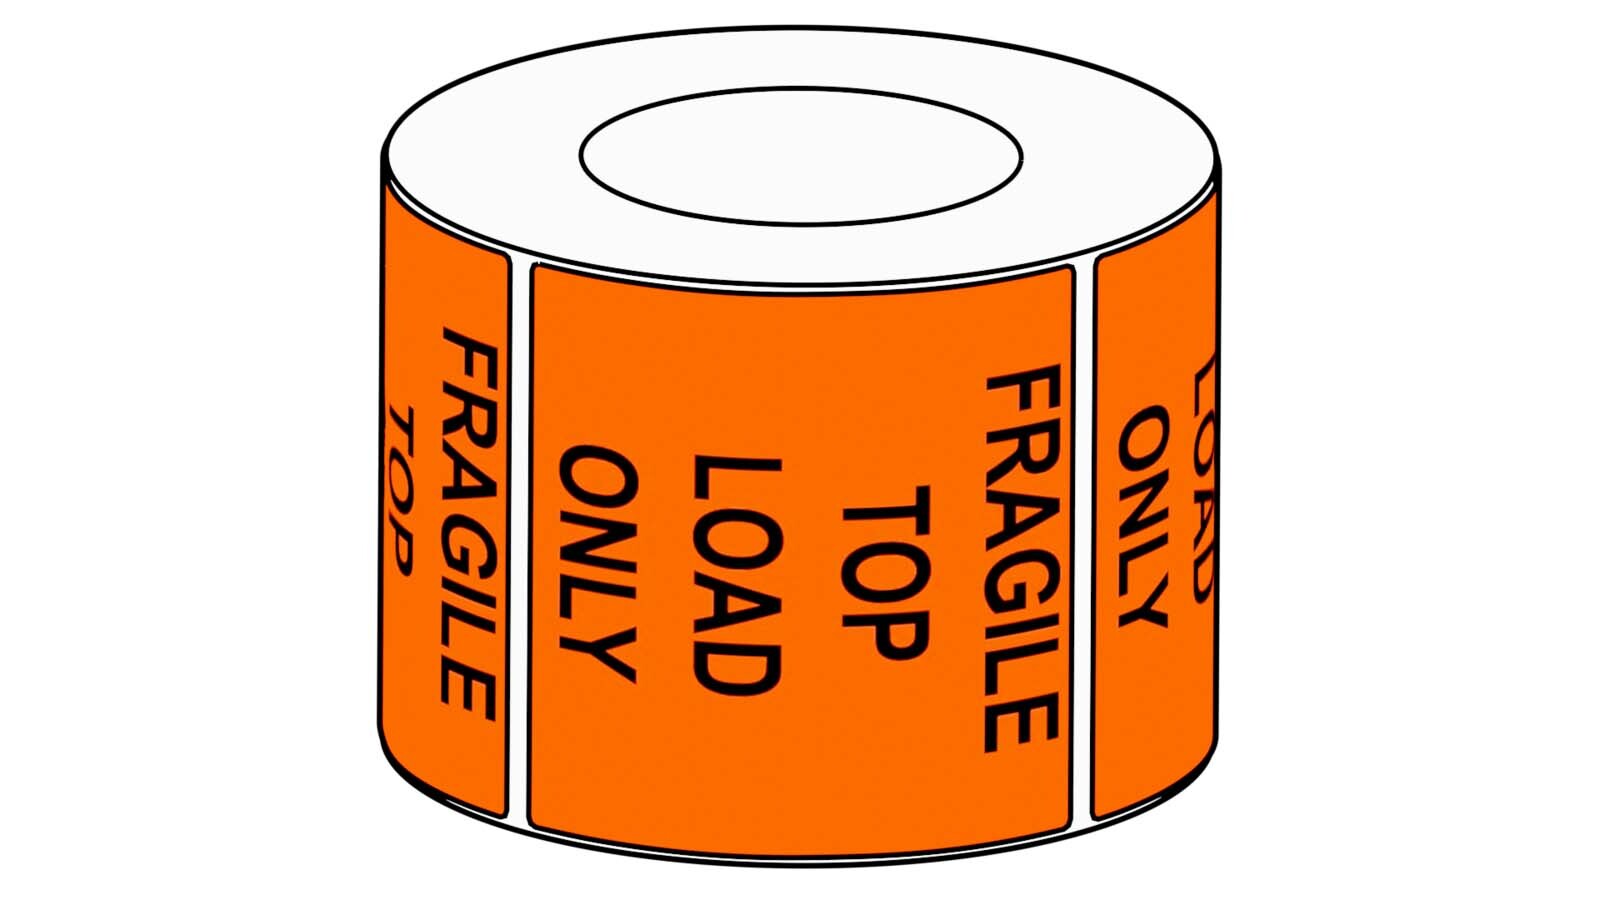 100x100mm Top Load Only Label, 500 per roll, 76mm core